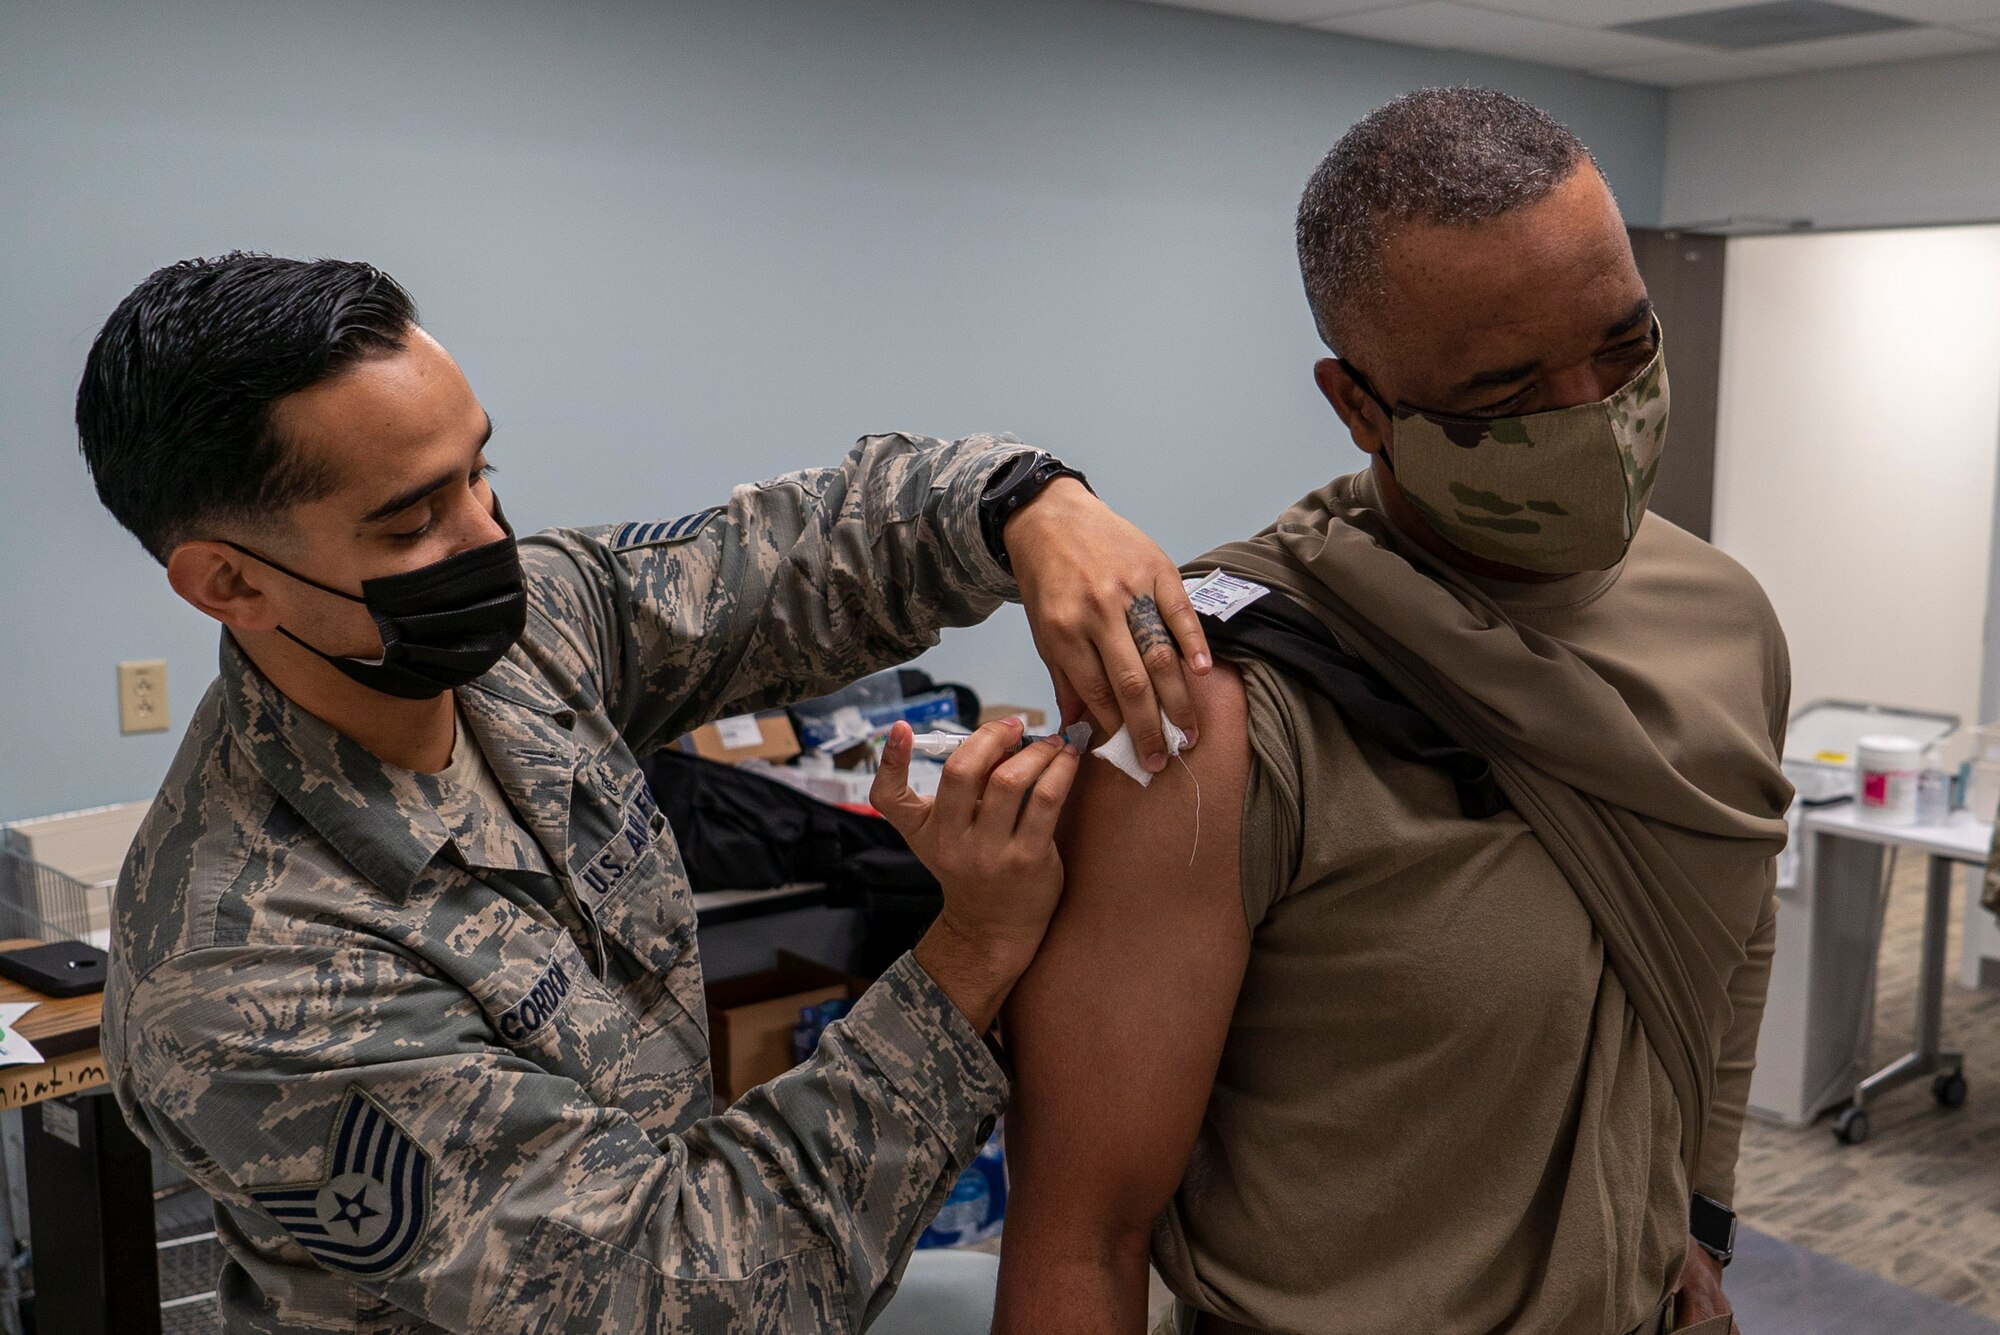 U.S. Air Force Reserve Technical Sgt. Franklin Cordon a medical technician with the 78th Healthcare Operations Squadron, administers the Covid-19 vaccine to Chief Master Sgt. Timothy White, senior enlisted advisor to the chief of the Air Force Reserve and command chief, Air Force Reserve Command, January 8th, 2021 at Robins Air Force Base, GA. (US Air Force photo by Technical Sgt. Nicholas A. Priest)